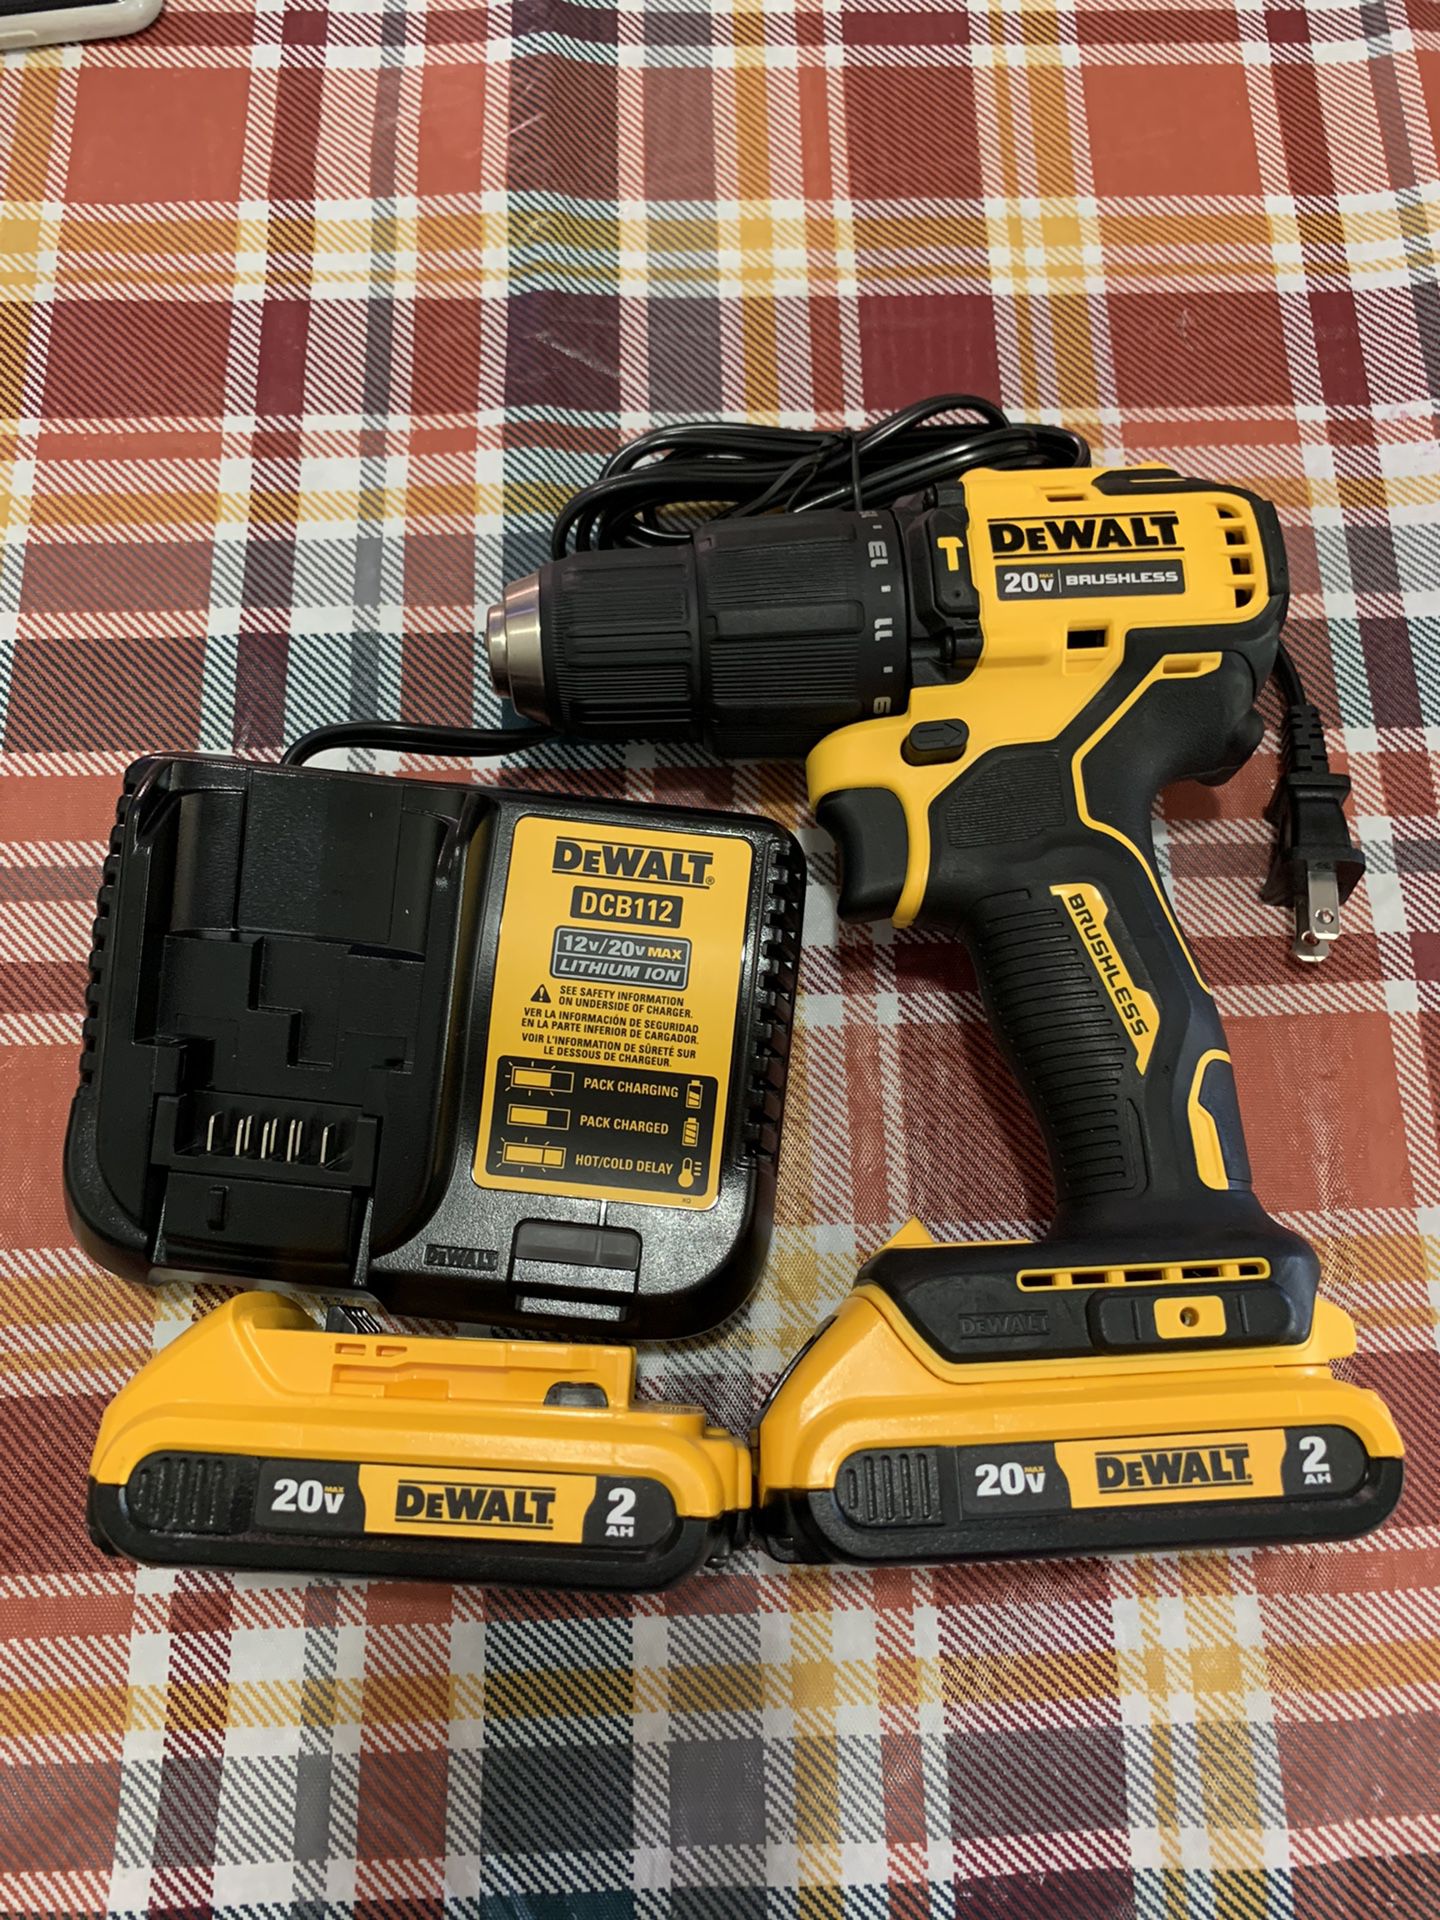 DEWALT DCD709 CORDLESS HAMMER DRILL/ DRILL DRIVER 1/2 WITH TWO BATTERIES 2.0 AND CHARGER BRAND NEW